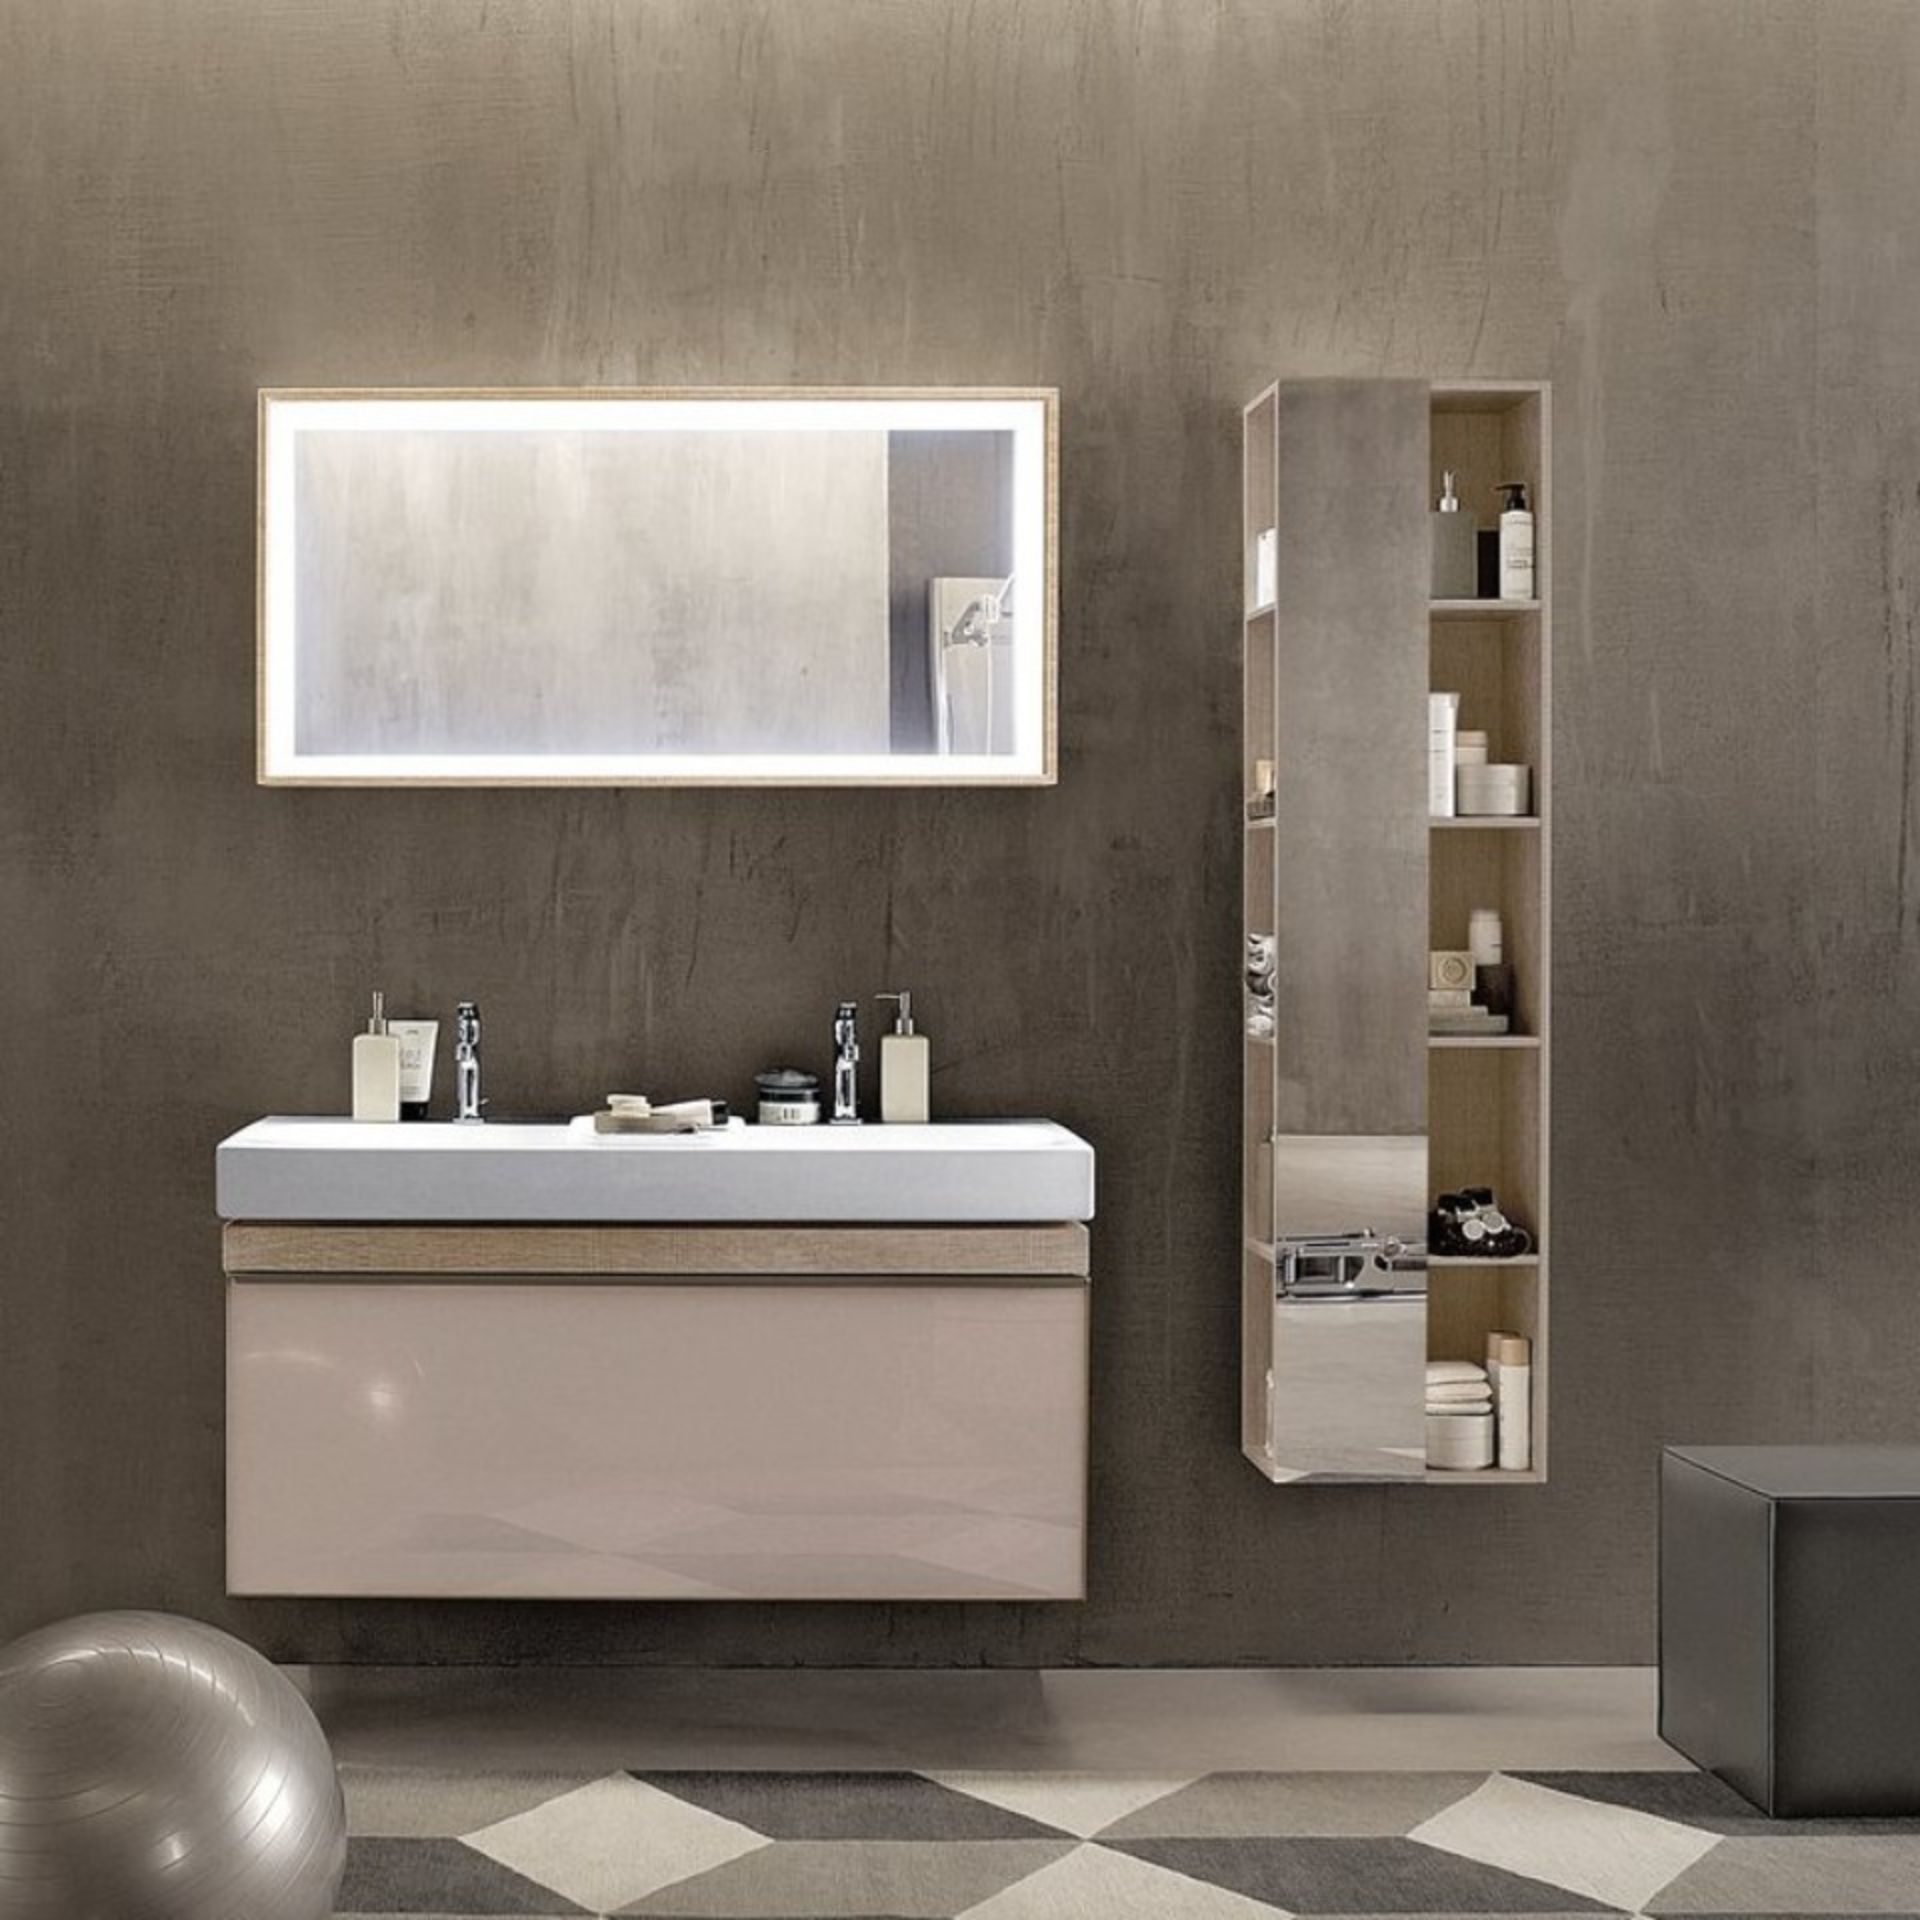 (RR10) 1600x400mm Keramag Citterio Mirror with Shleves. RRP £772.99. Geberit Citterio combines... (